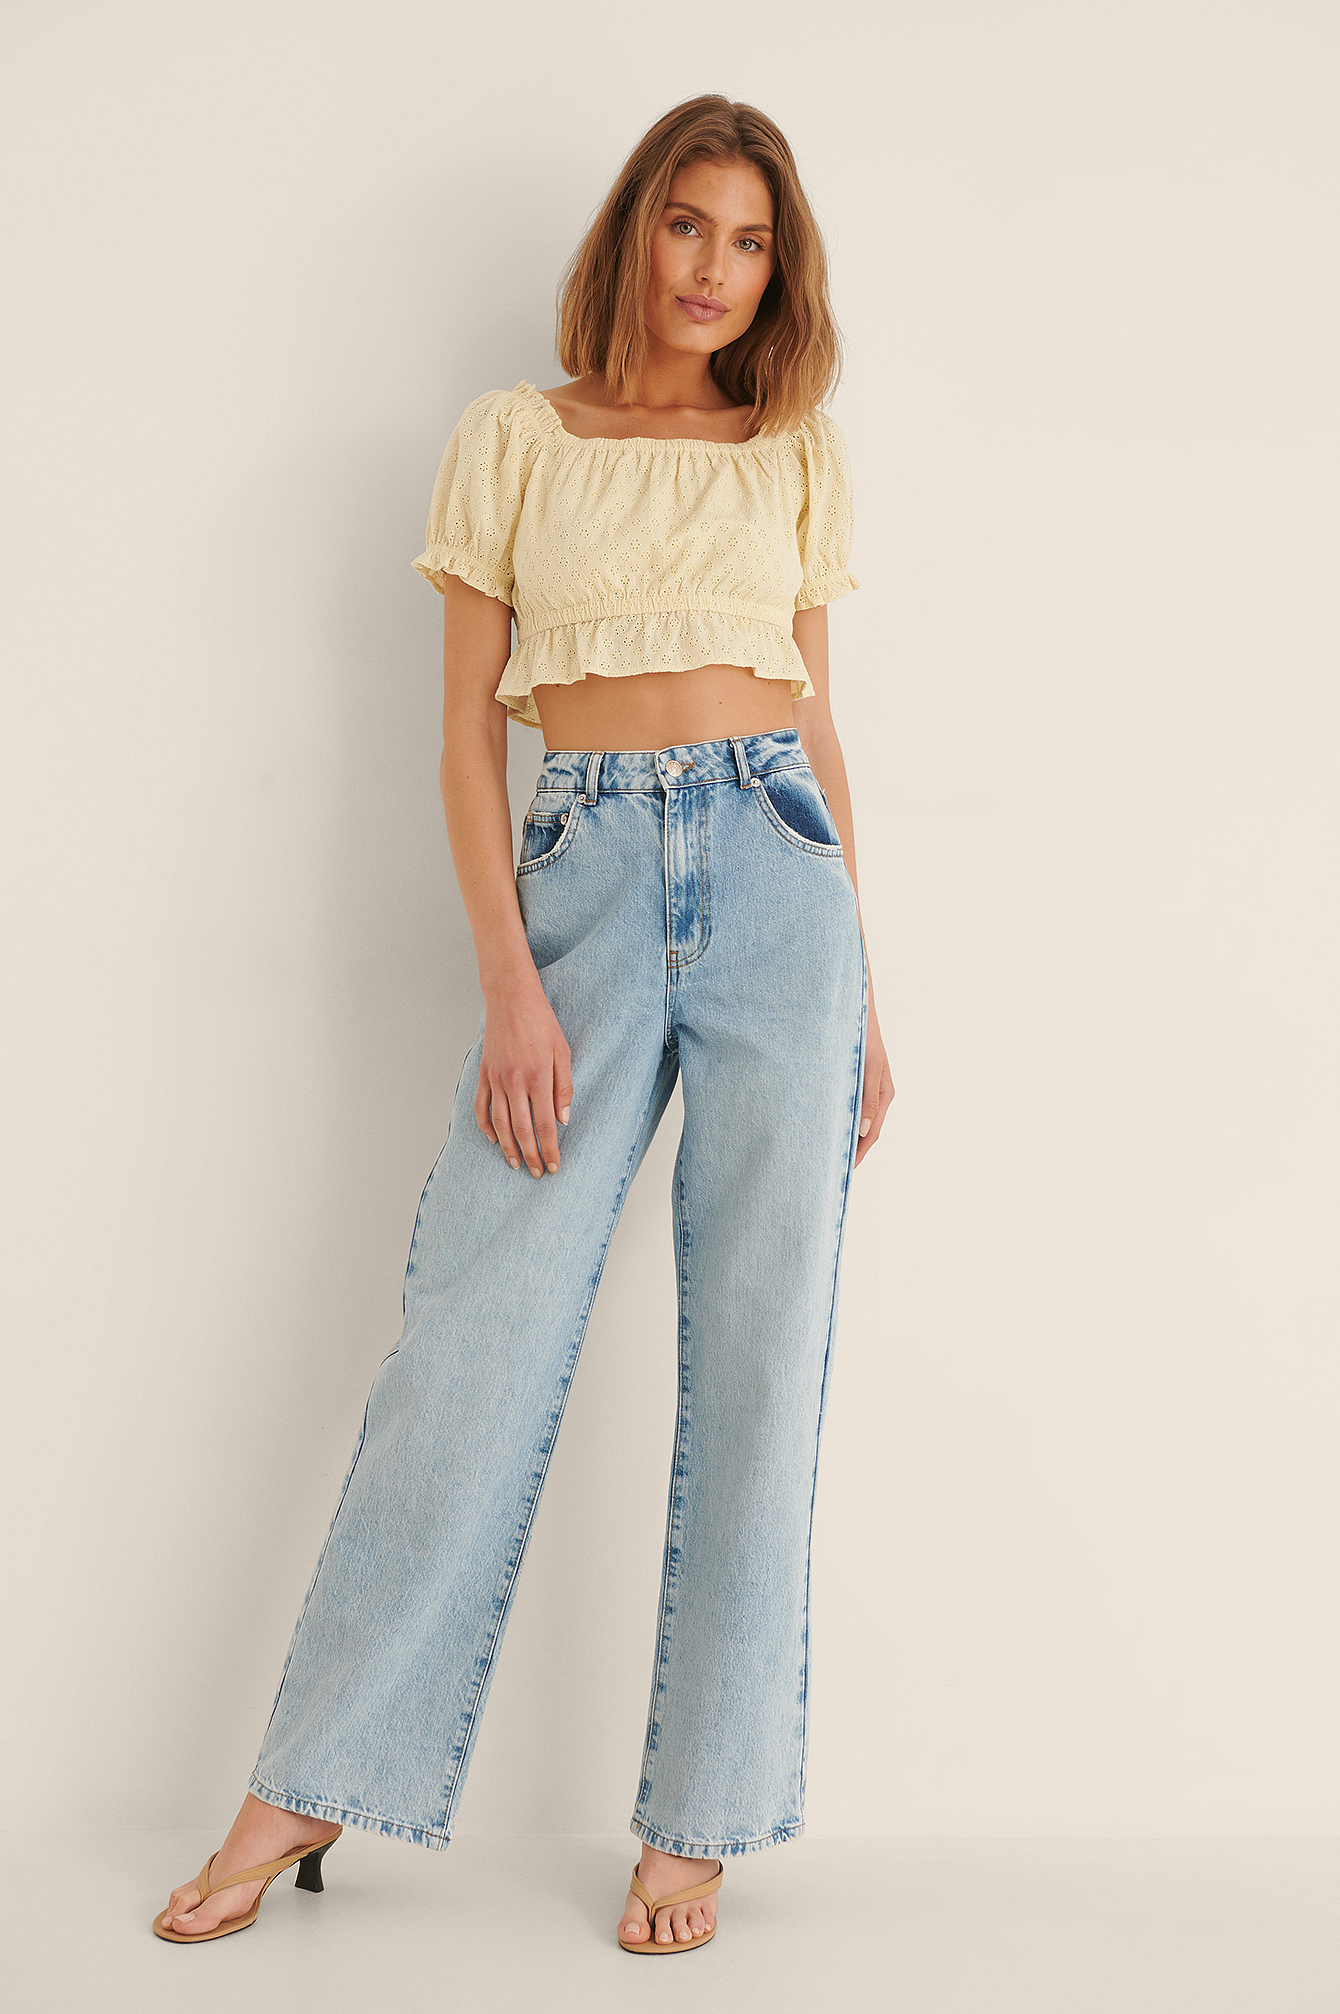 Anglaise Cropped Top Outfit